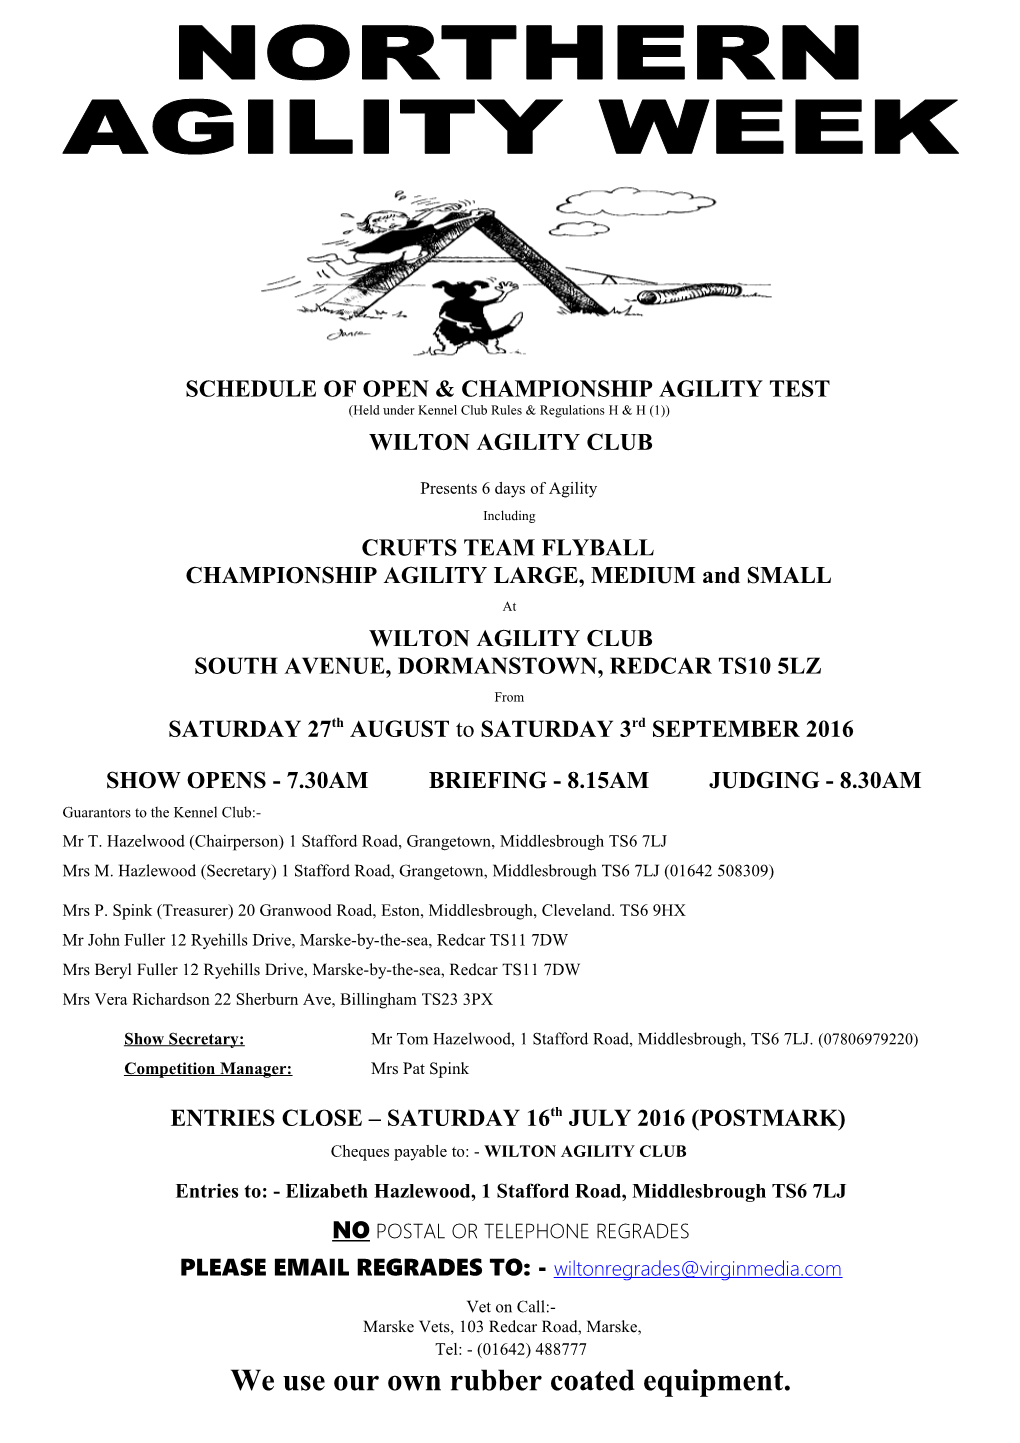 Schedule of Open & Championship Agility Test